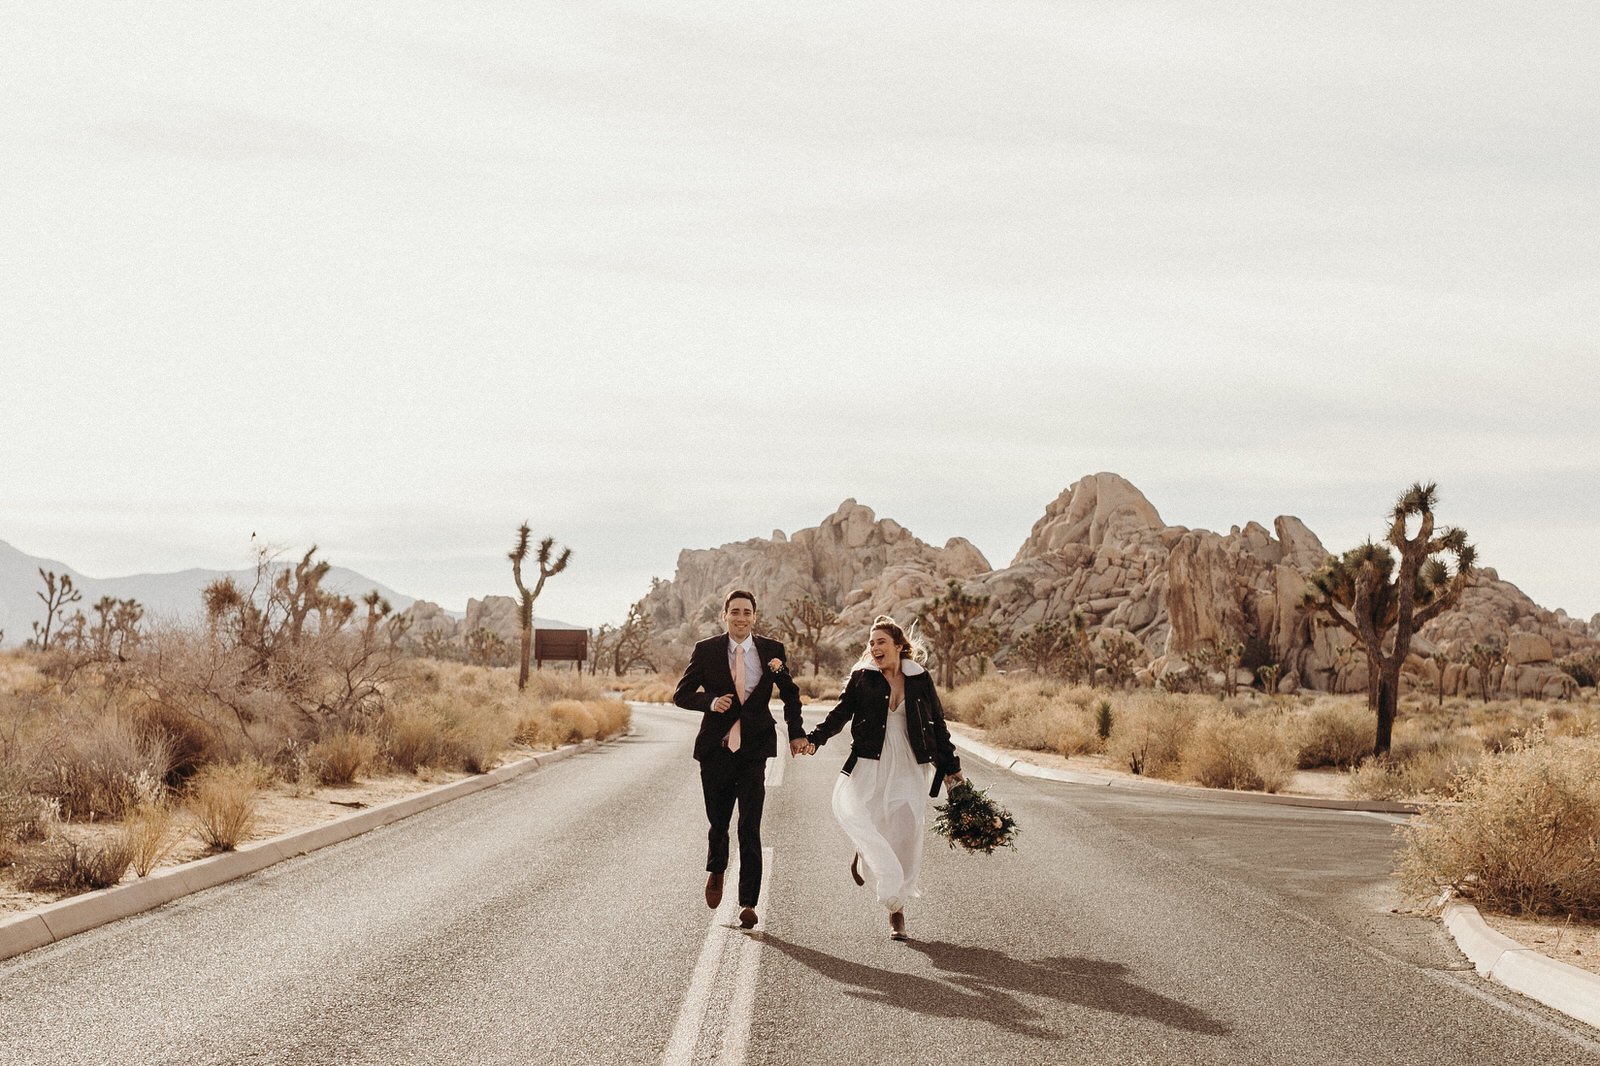 Minimalist-Backpacking-Elopement-in-the-Desert-image-by-Victoria-Bonvicini (3).jpg